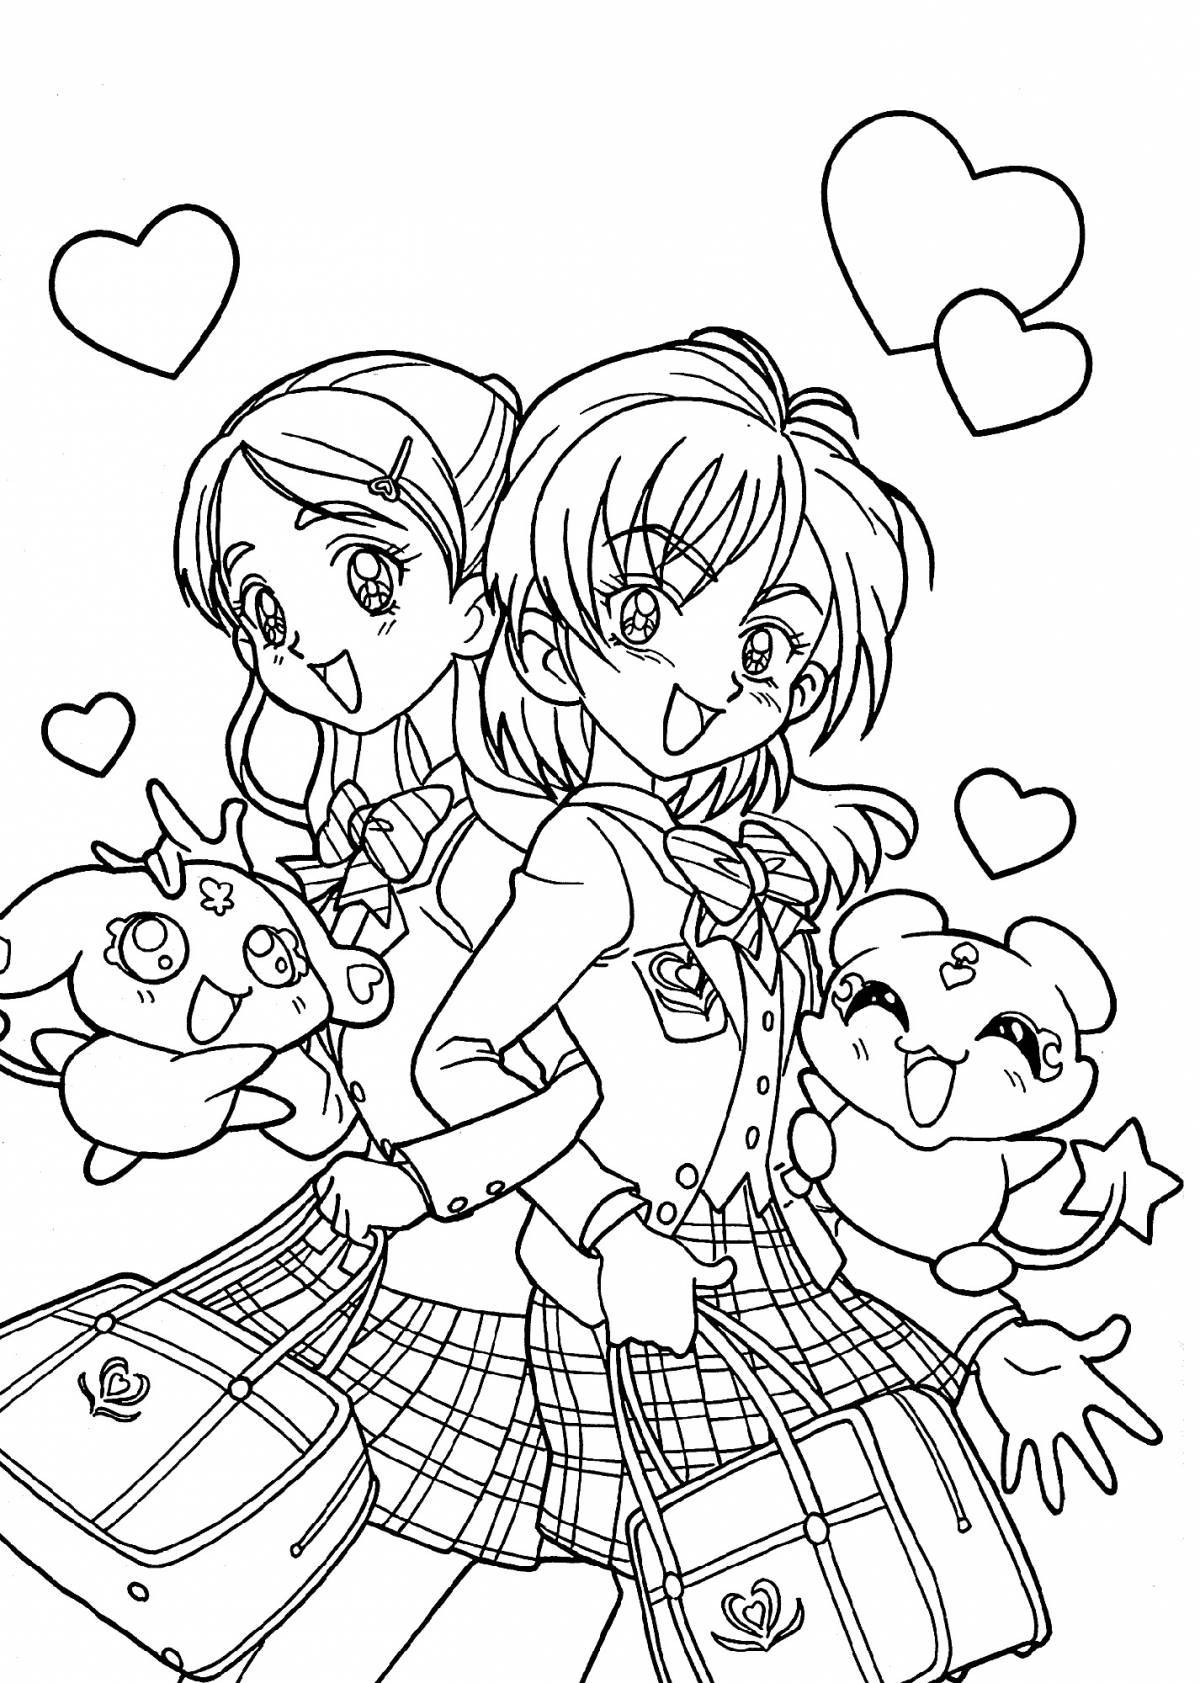 Charming anime coloring book for girls 10 years old